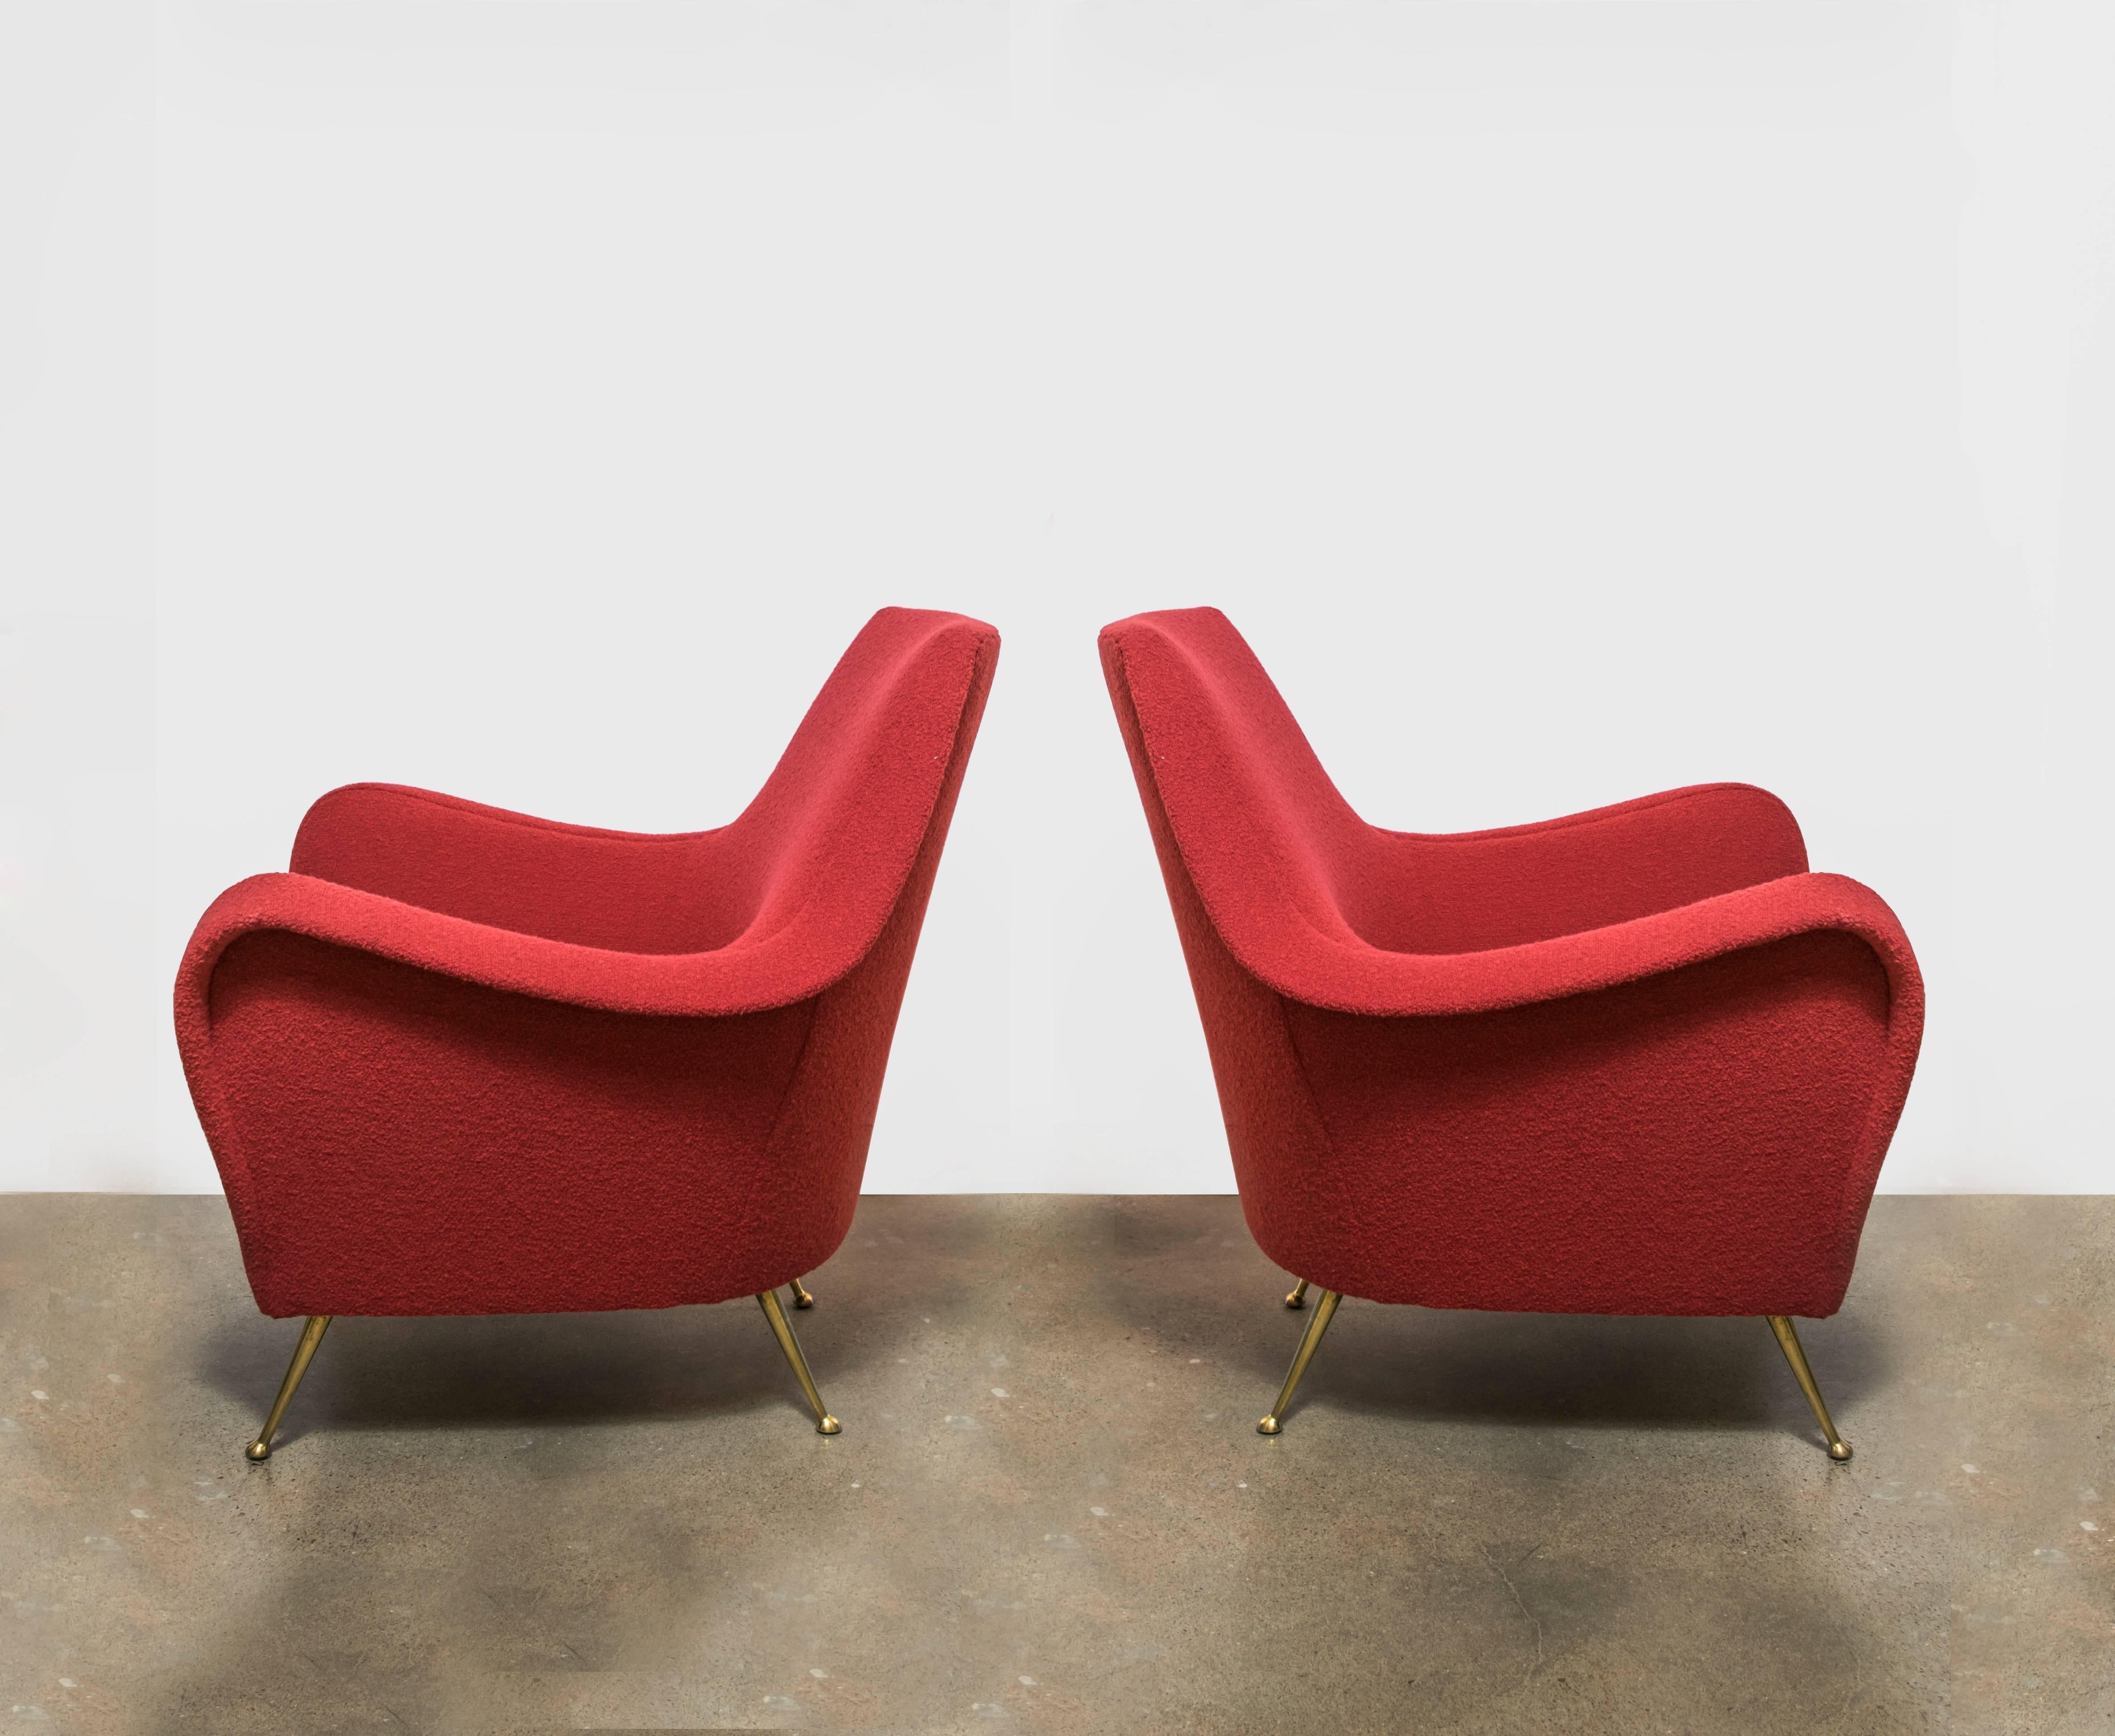 An elegant pair of Italian Mid-Century chairs by Arflex, in the style of Marco Zanuso and Ico Parisi. With stiletto brass legs, and a new Knoll textiles Classic bouclé in cayenne upholstery. Stunning and comfortable!